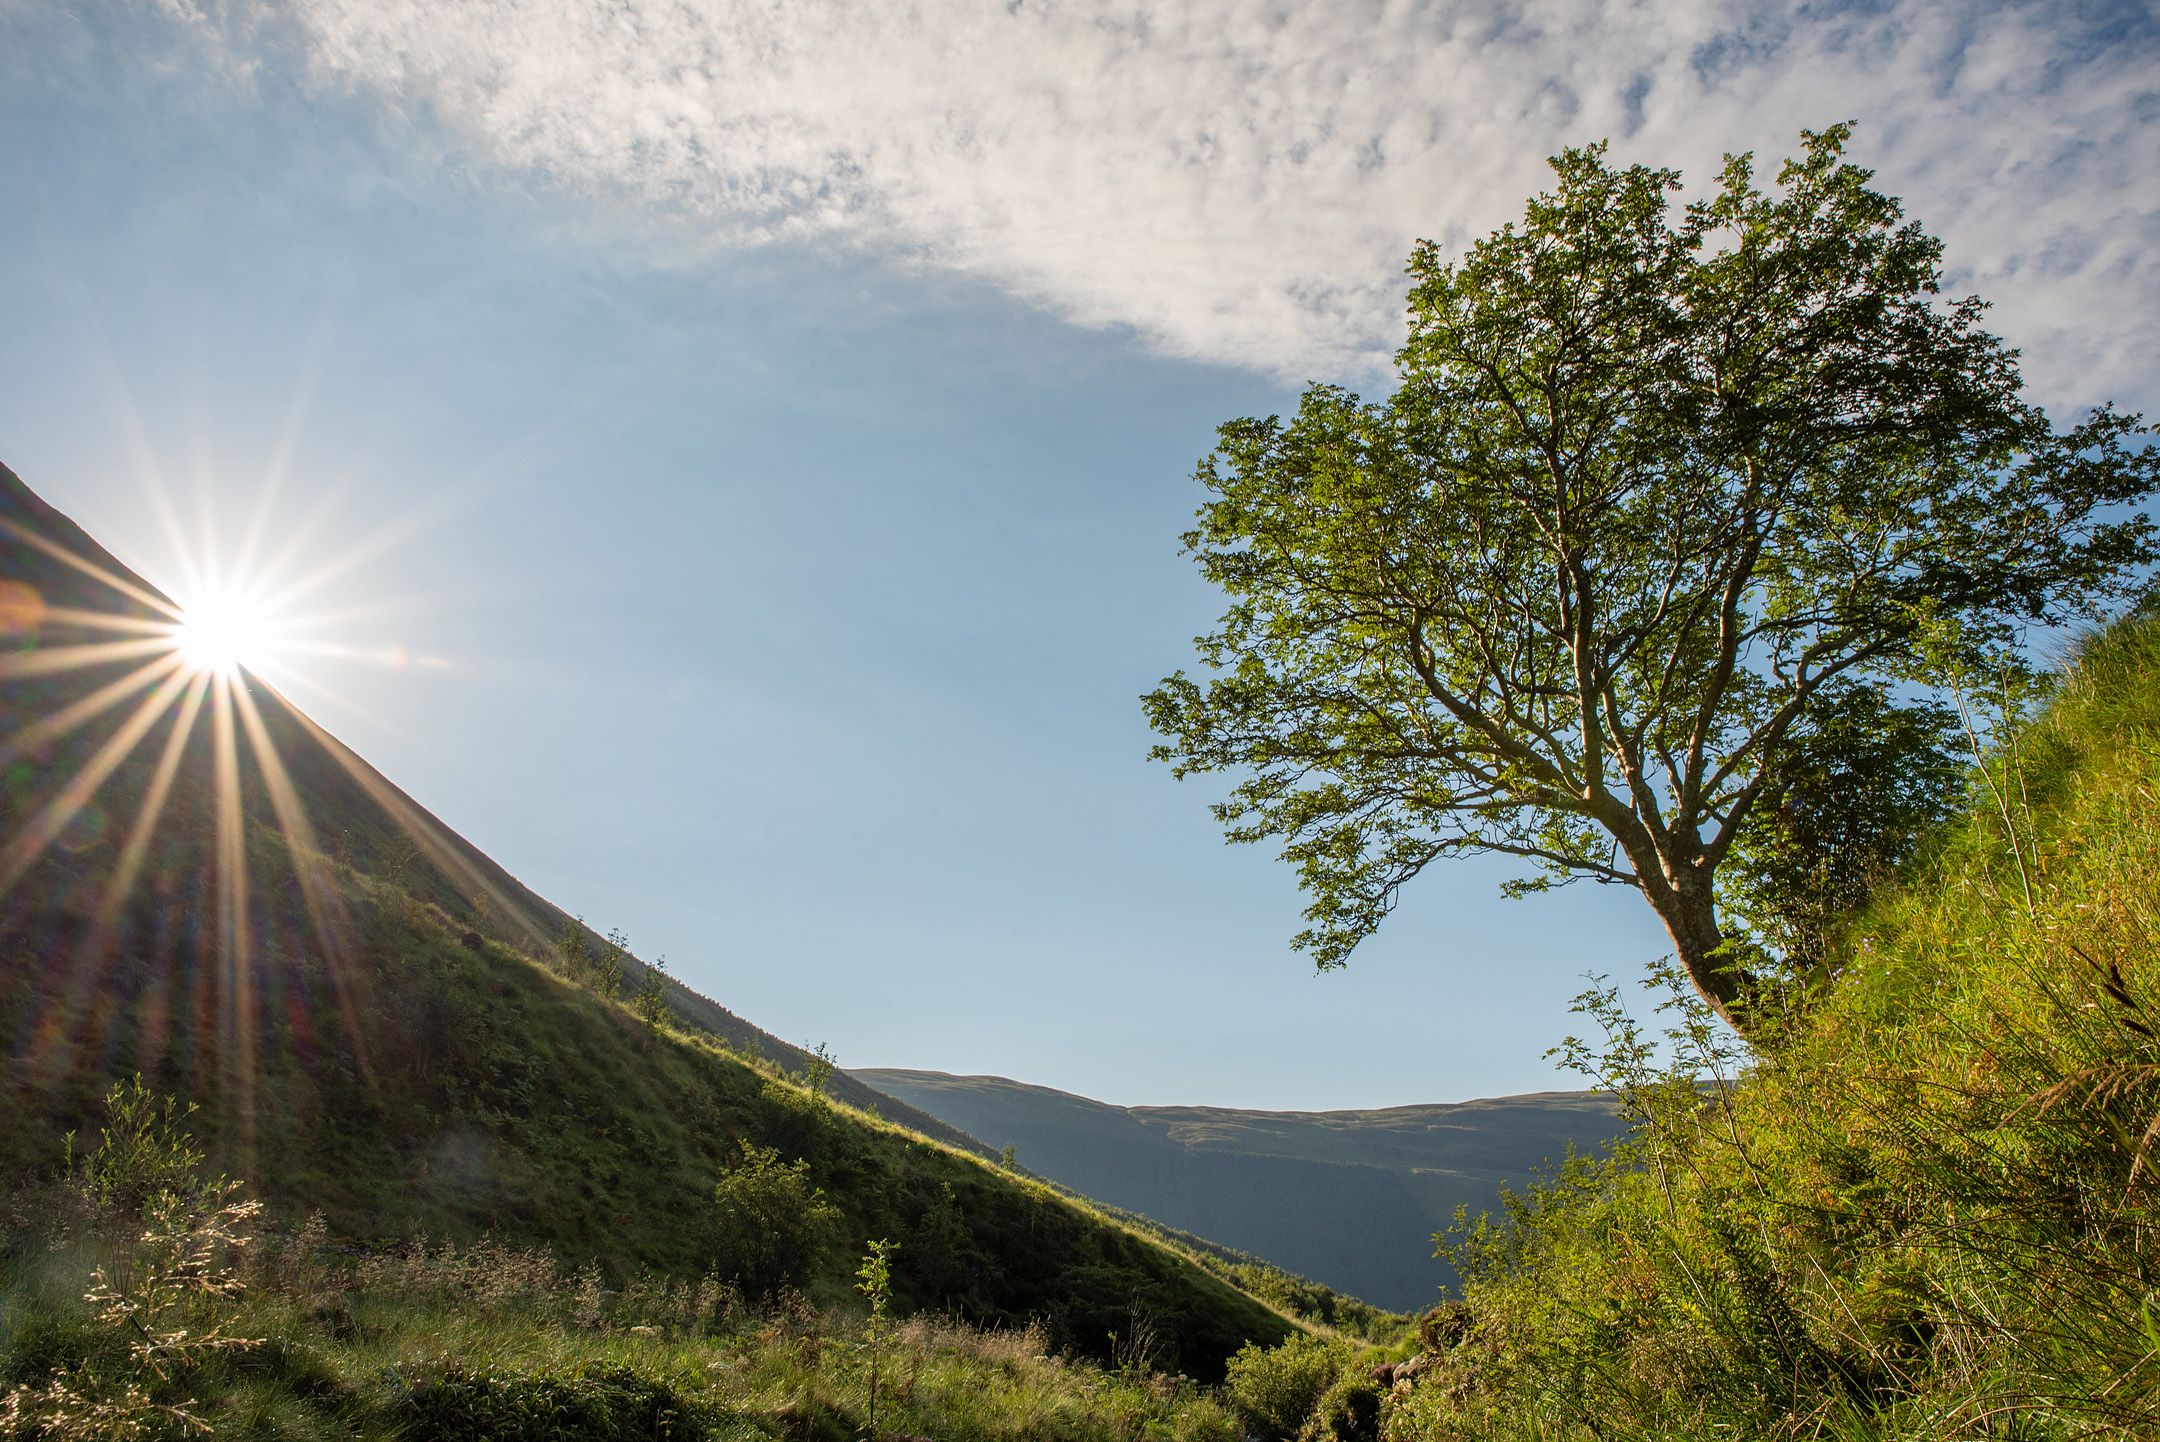 The Scotland Tree of the Year winner is the Survivor Tree in Carrifran valley (Aiden Maccormick/Woodland Trust/PA)